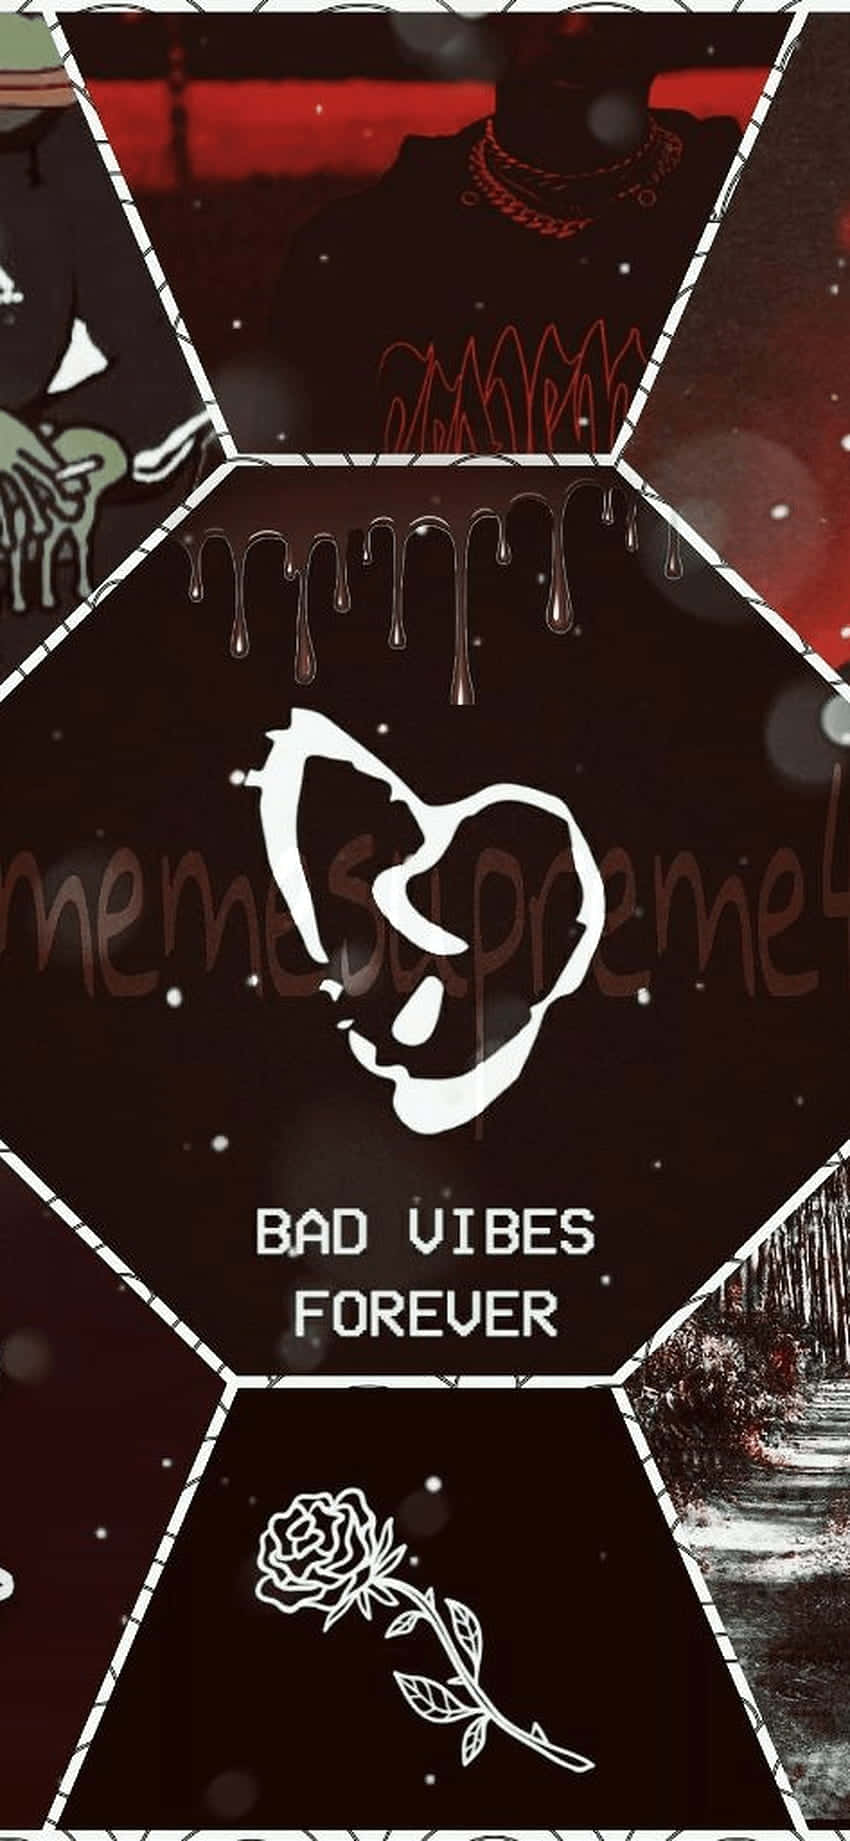 The Bad Vibes Don't Feel Good Wallpaper